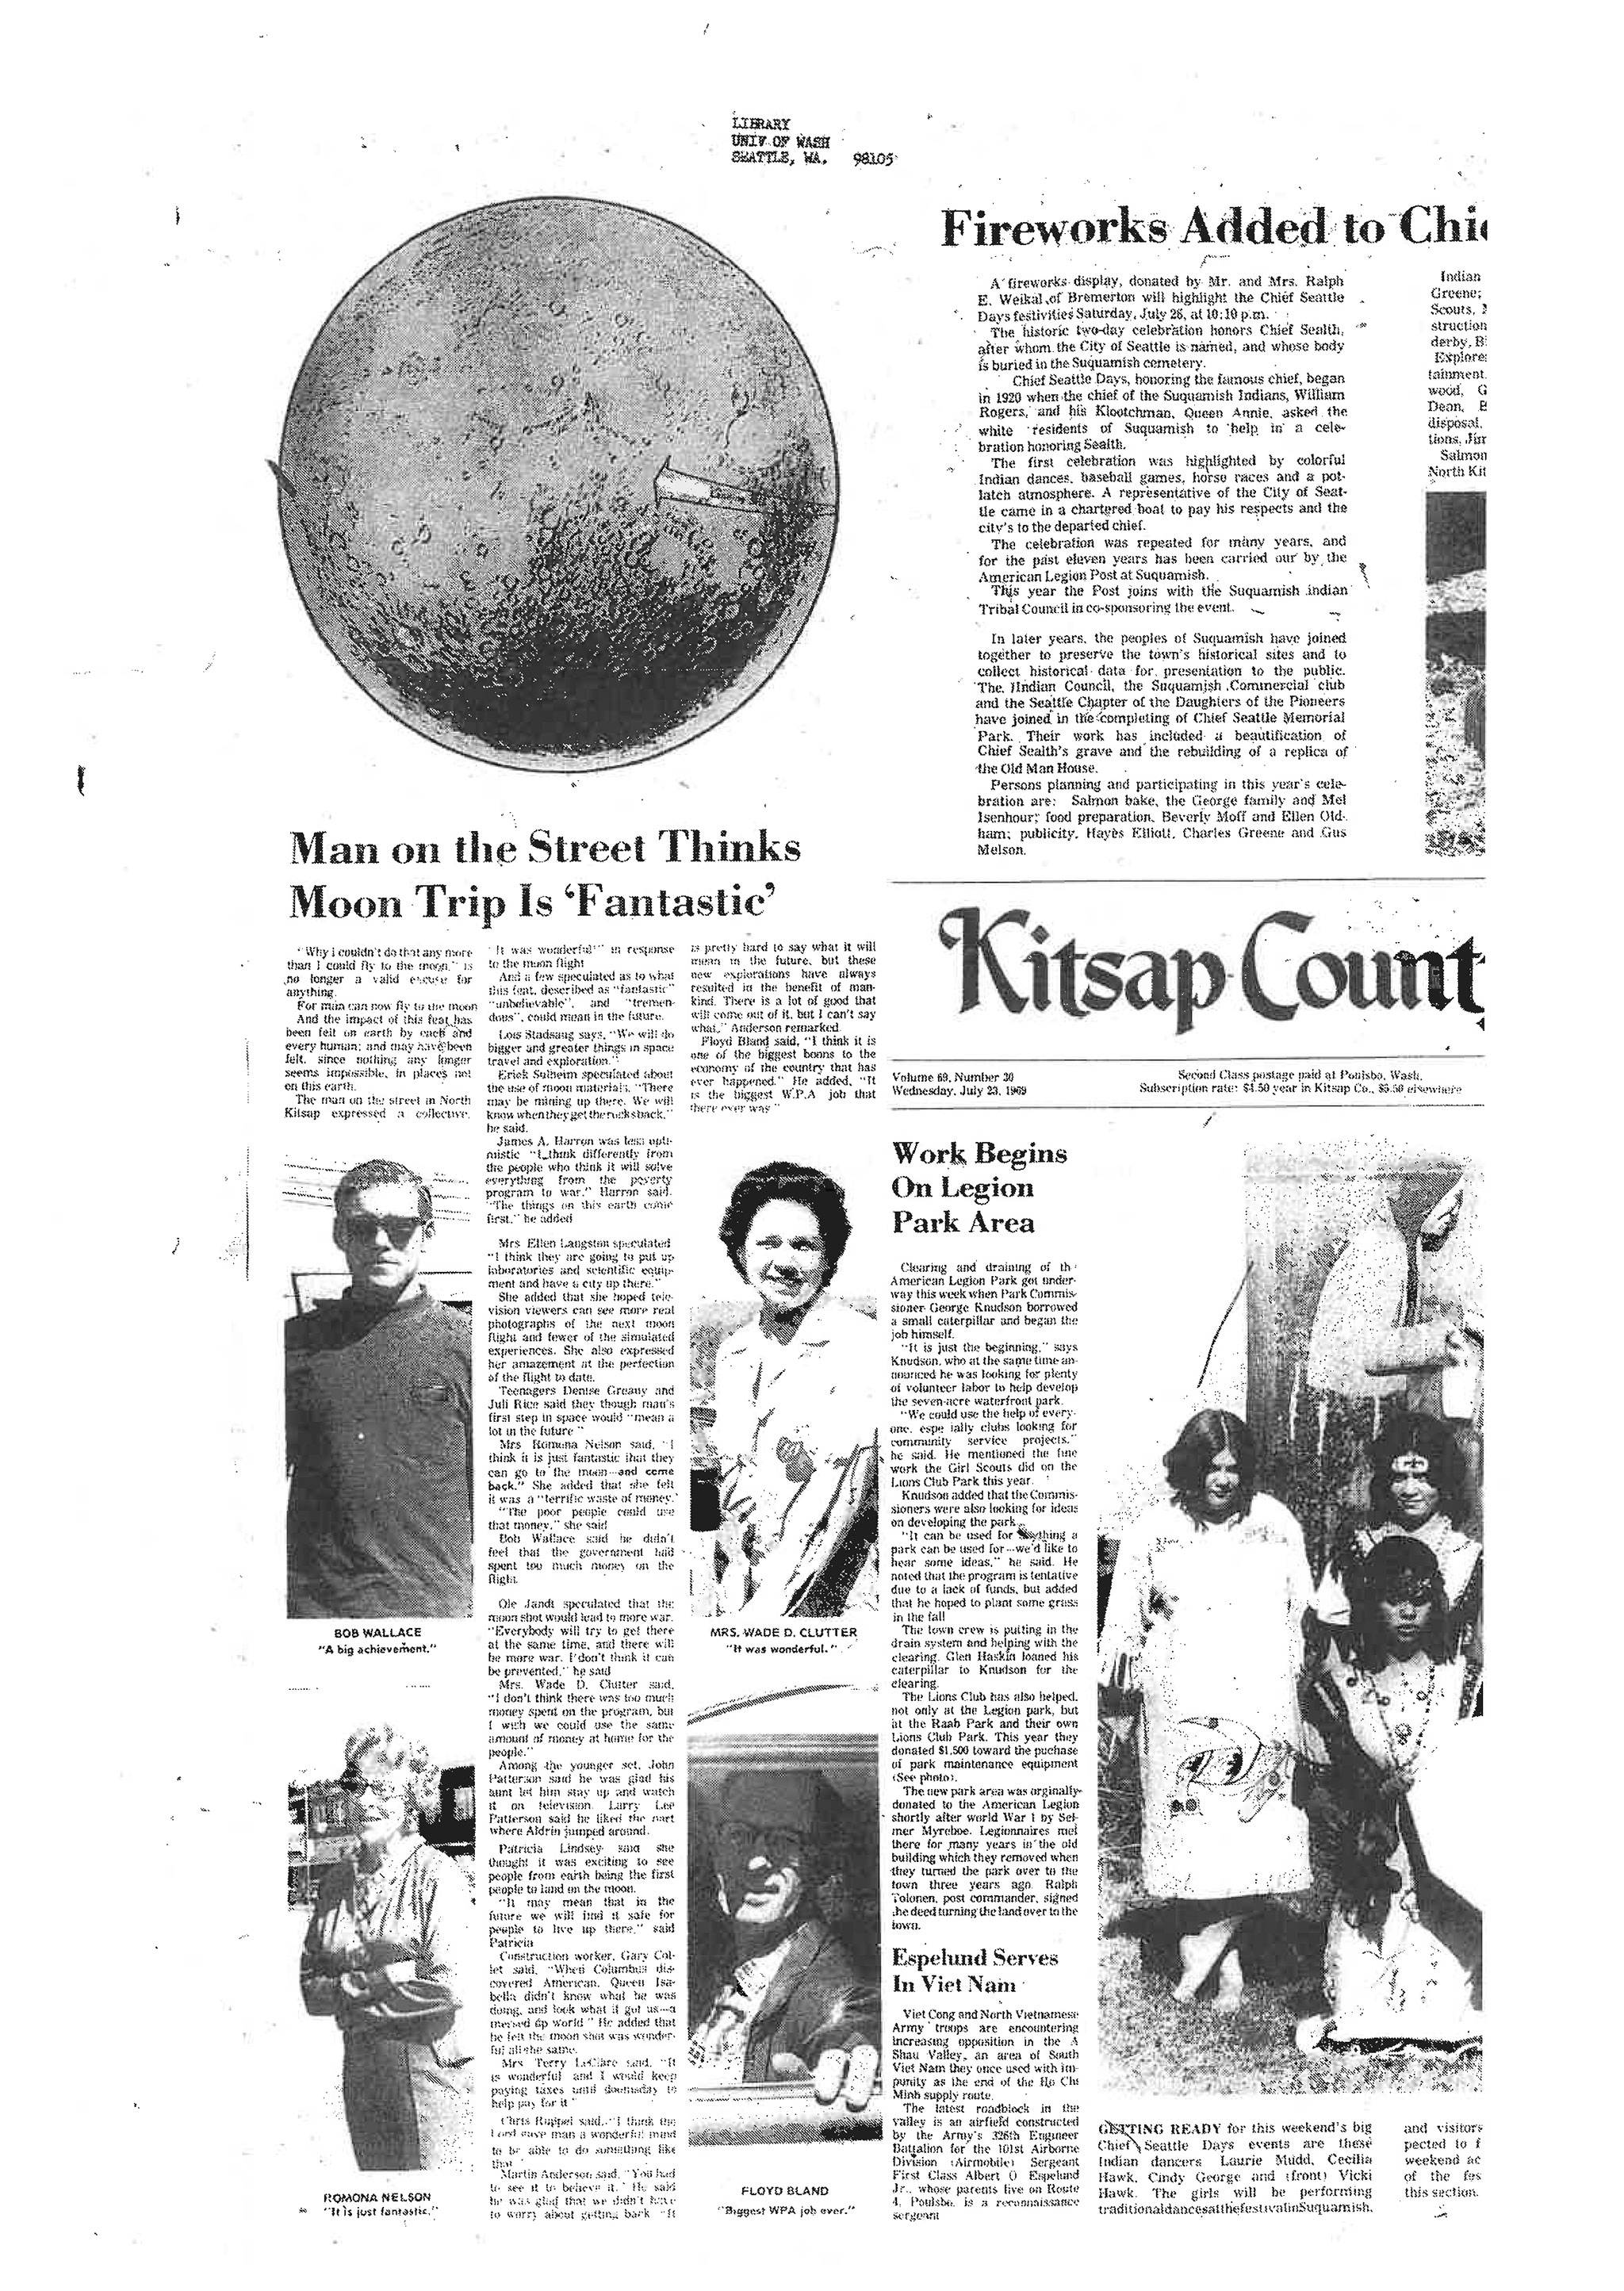 Local residents were given a chance to weigh in on the Moon landing in “Man on the Street” interviews. (Kitsap Regional Library archives)